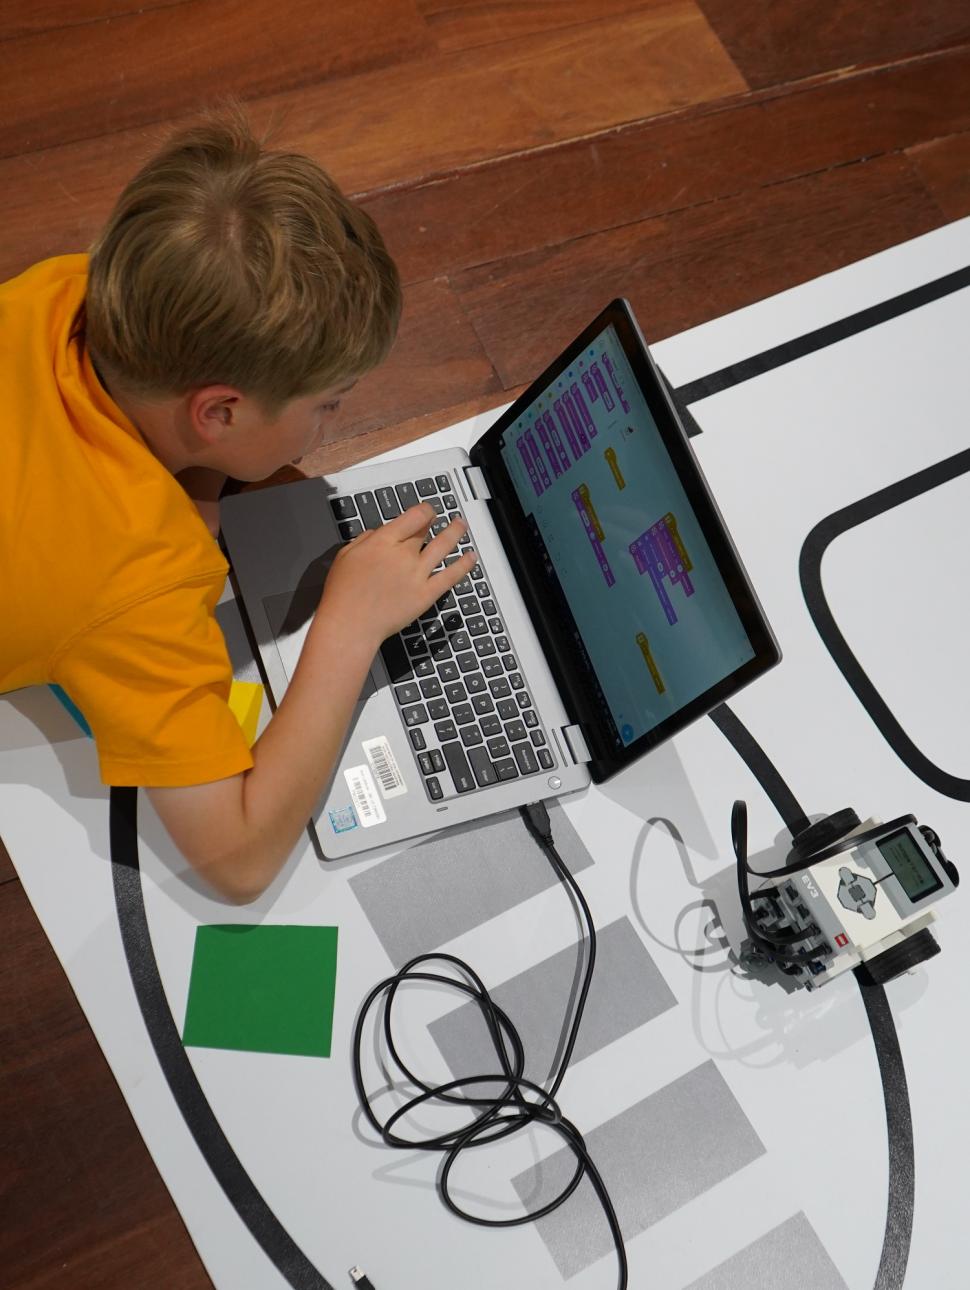 This image shows a burds eye view of a child  on the floor using a laptop computer  to program a  robot to follow a pathway printed on black and white a floormat. 